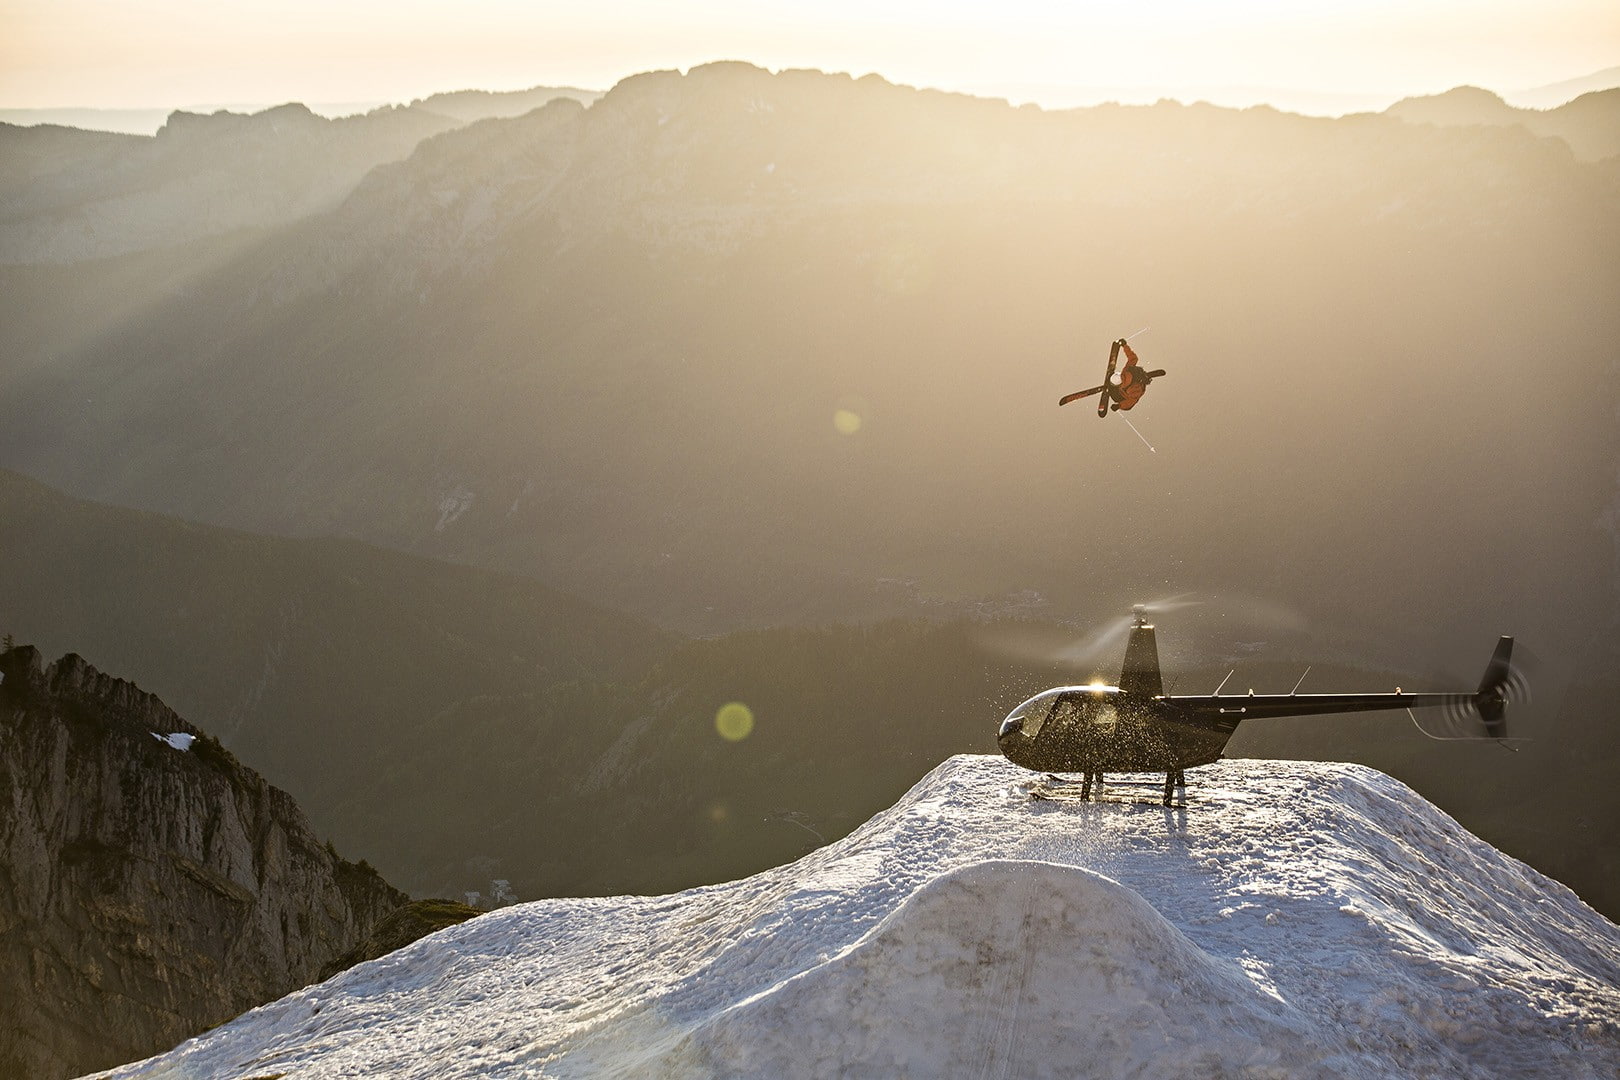 Candide Thovex, helicopters, skiing, skis, snow, mountain, mountain range